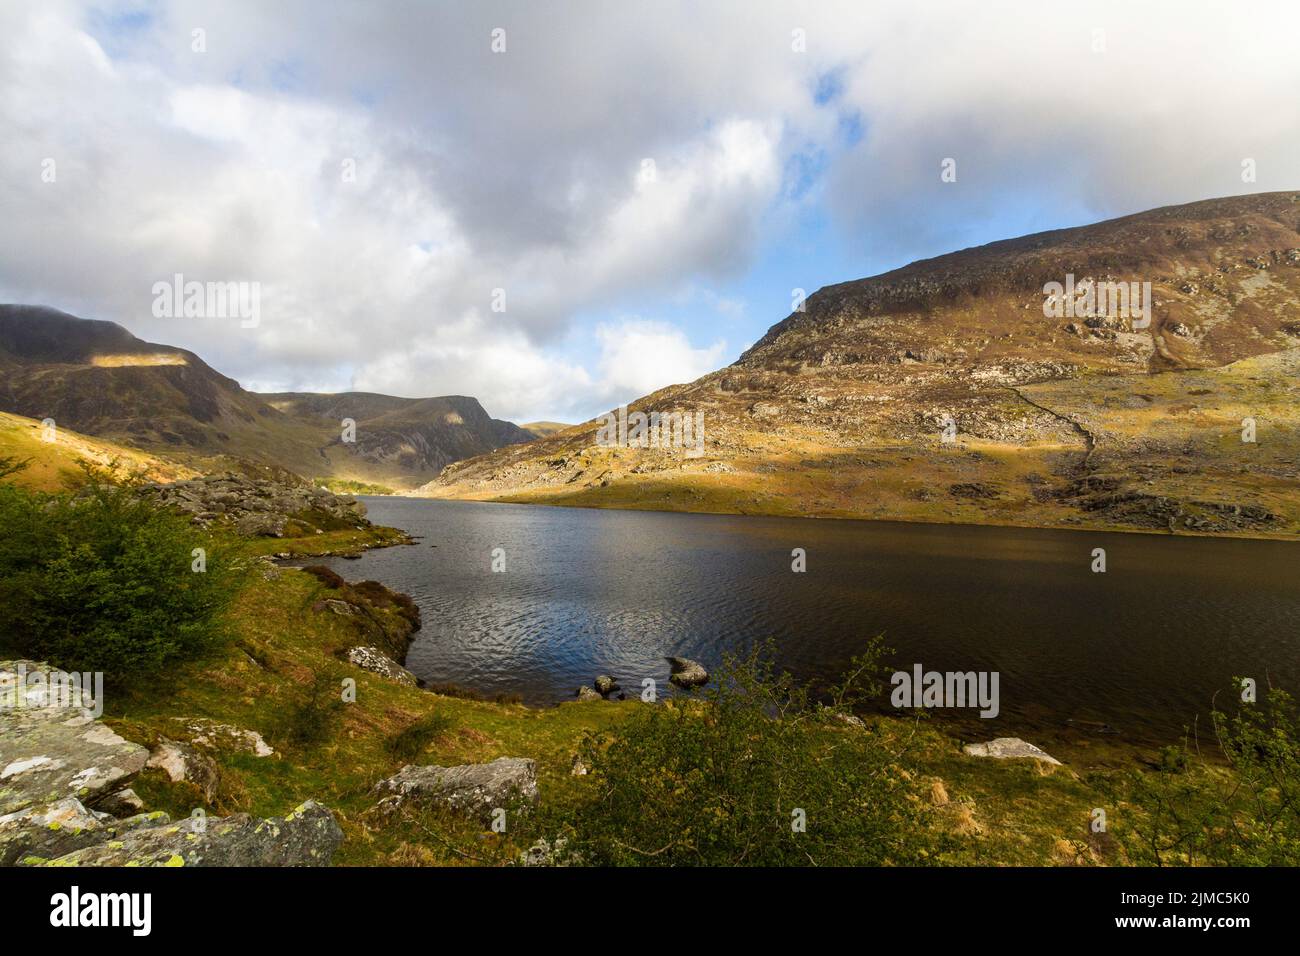 Lake or llyn Ogwen with mountain pen yr ole wen behind. With the Nant Ffrancon Pass, Bethesda, Snowdonia, North Wales, UK, Stock Photo